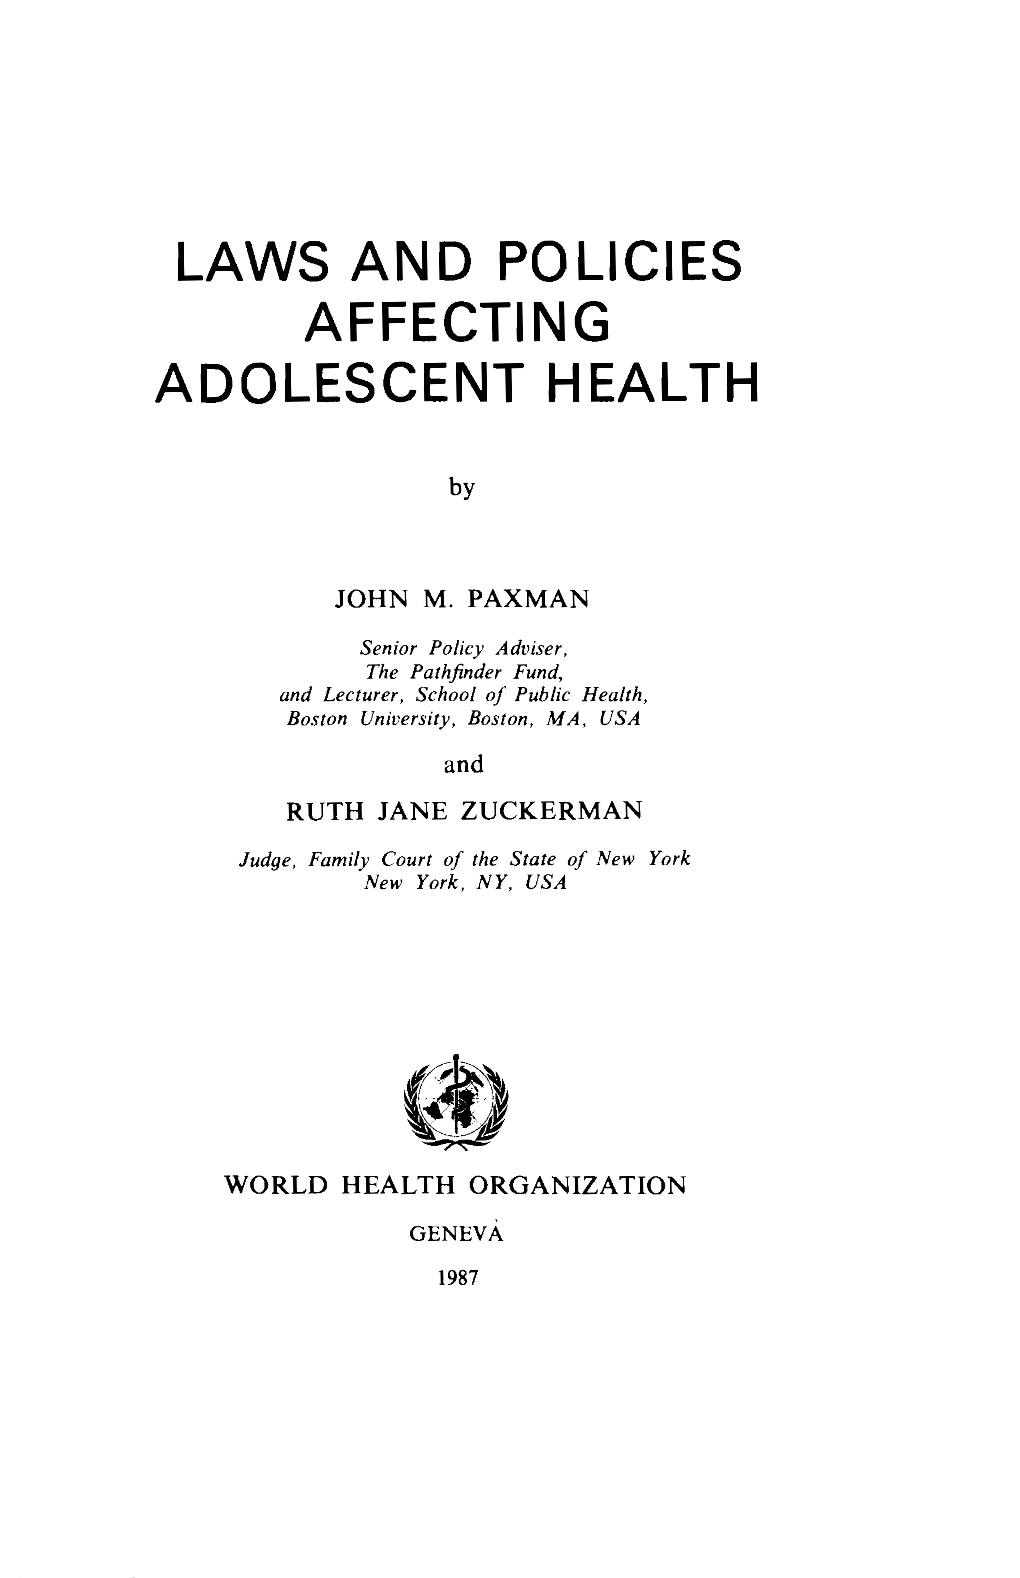 Laws and Policies Affecting Adolescent Health